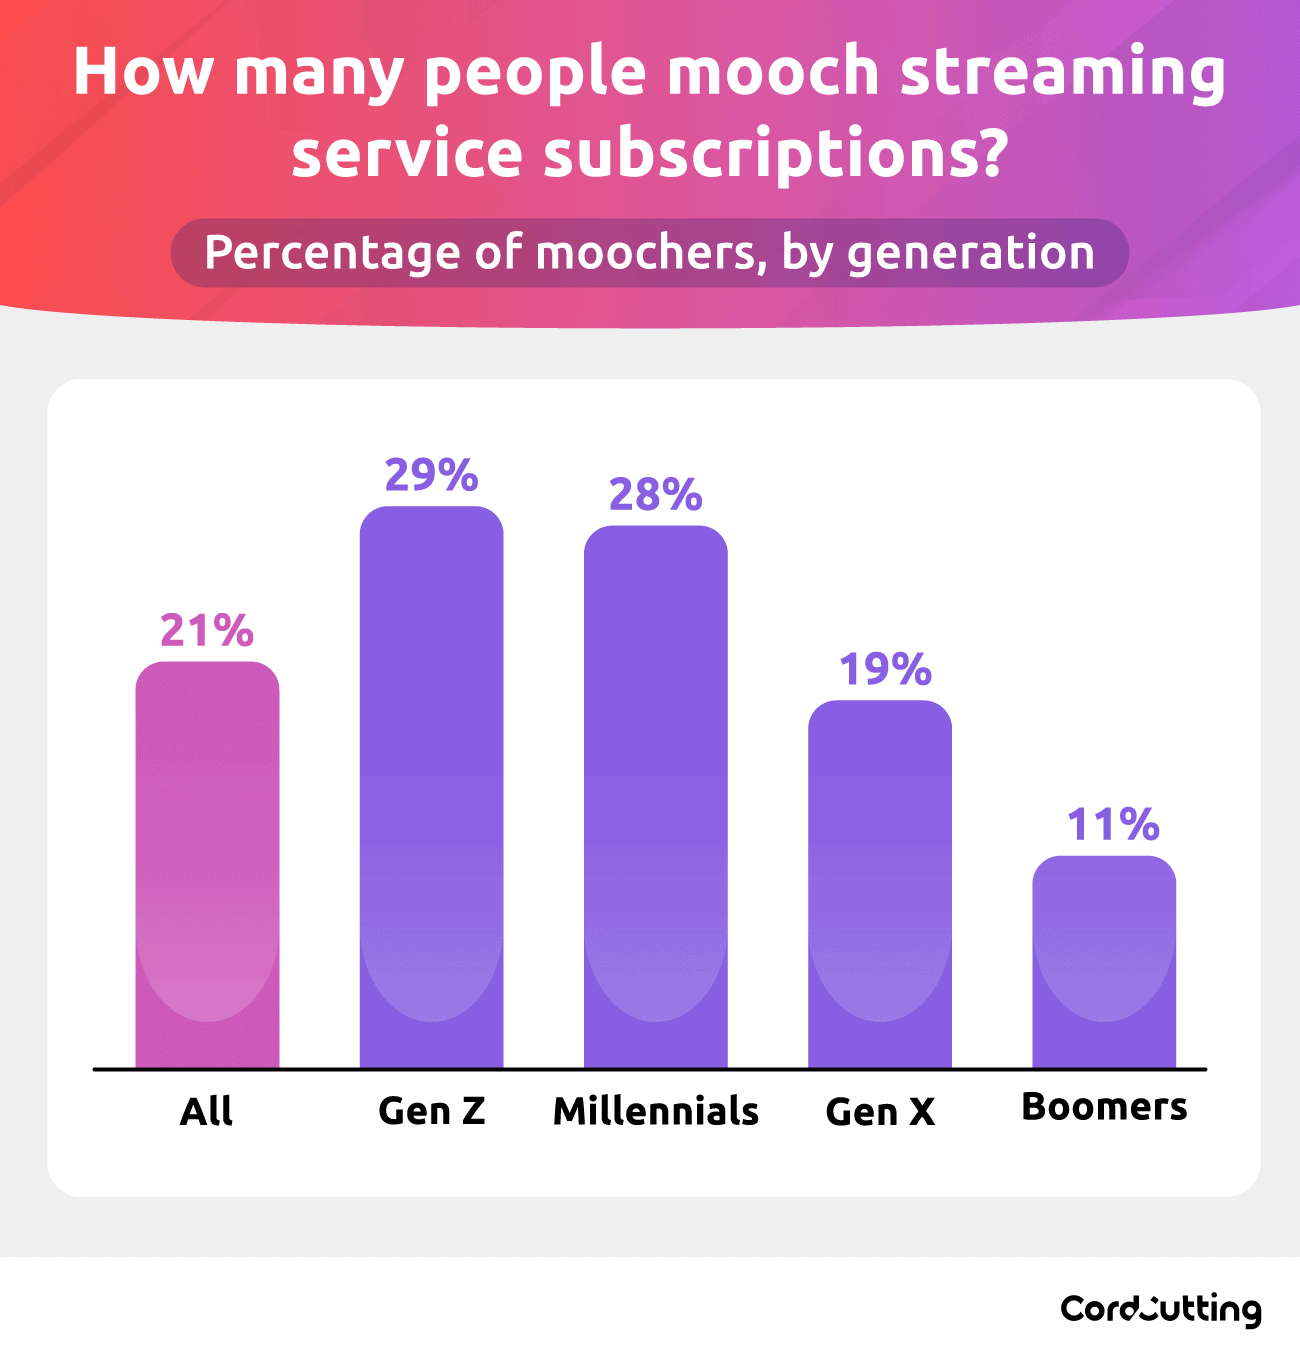 How many people mooch streaming service subscriptions